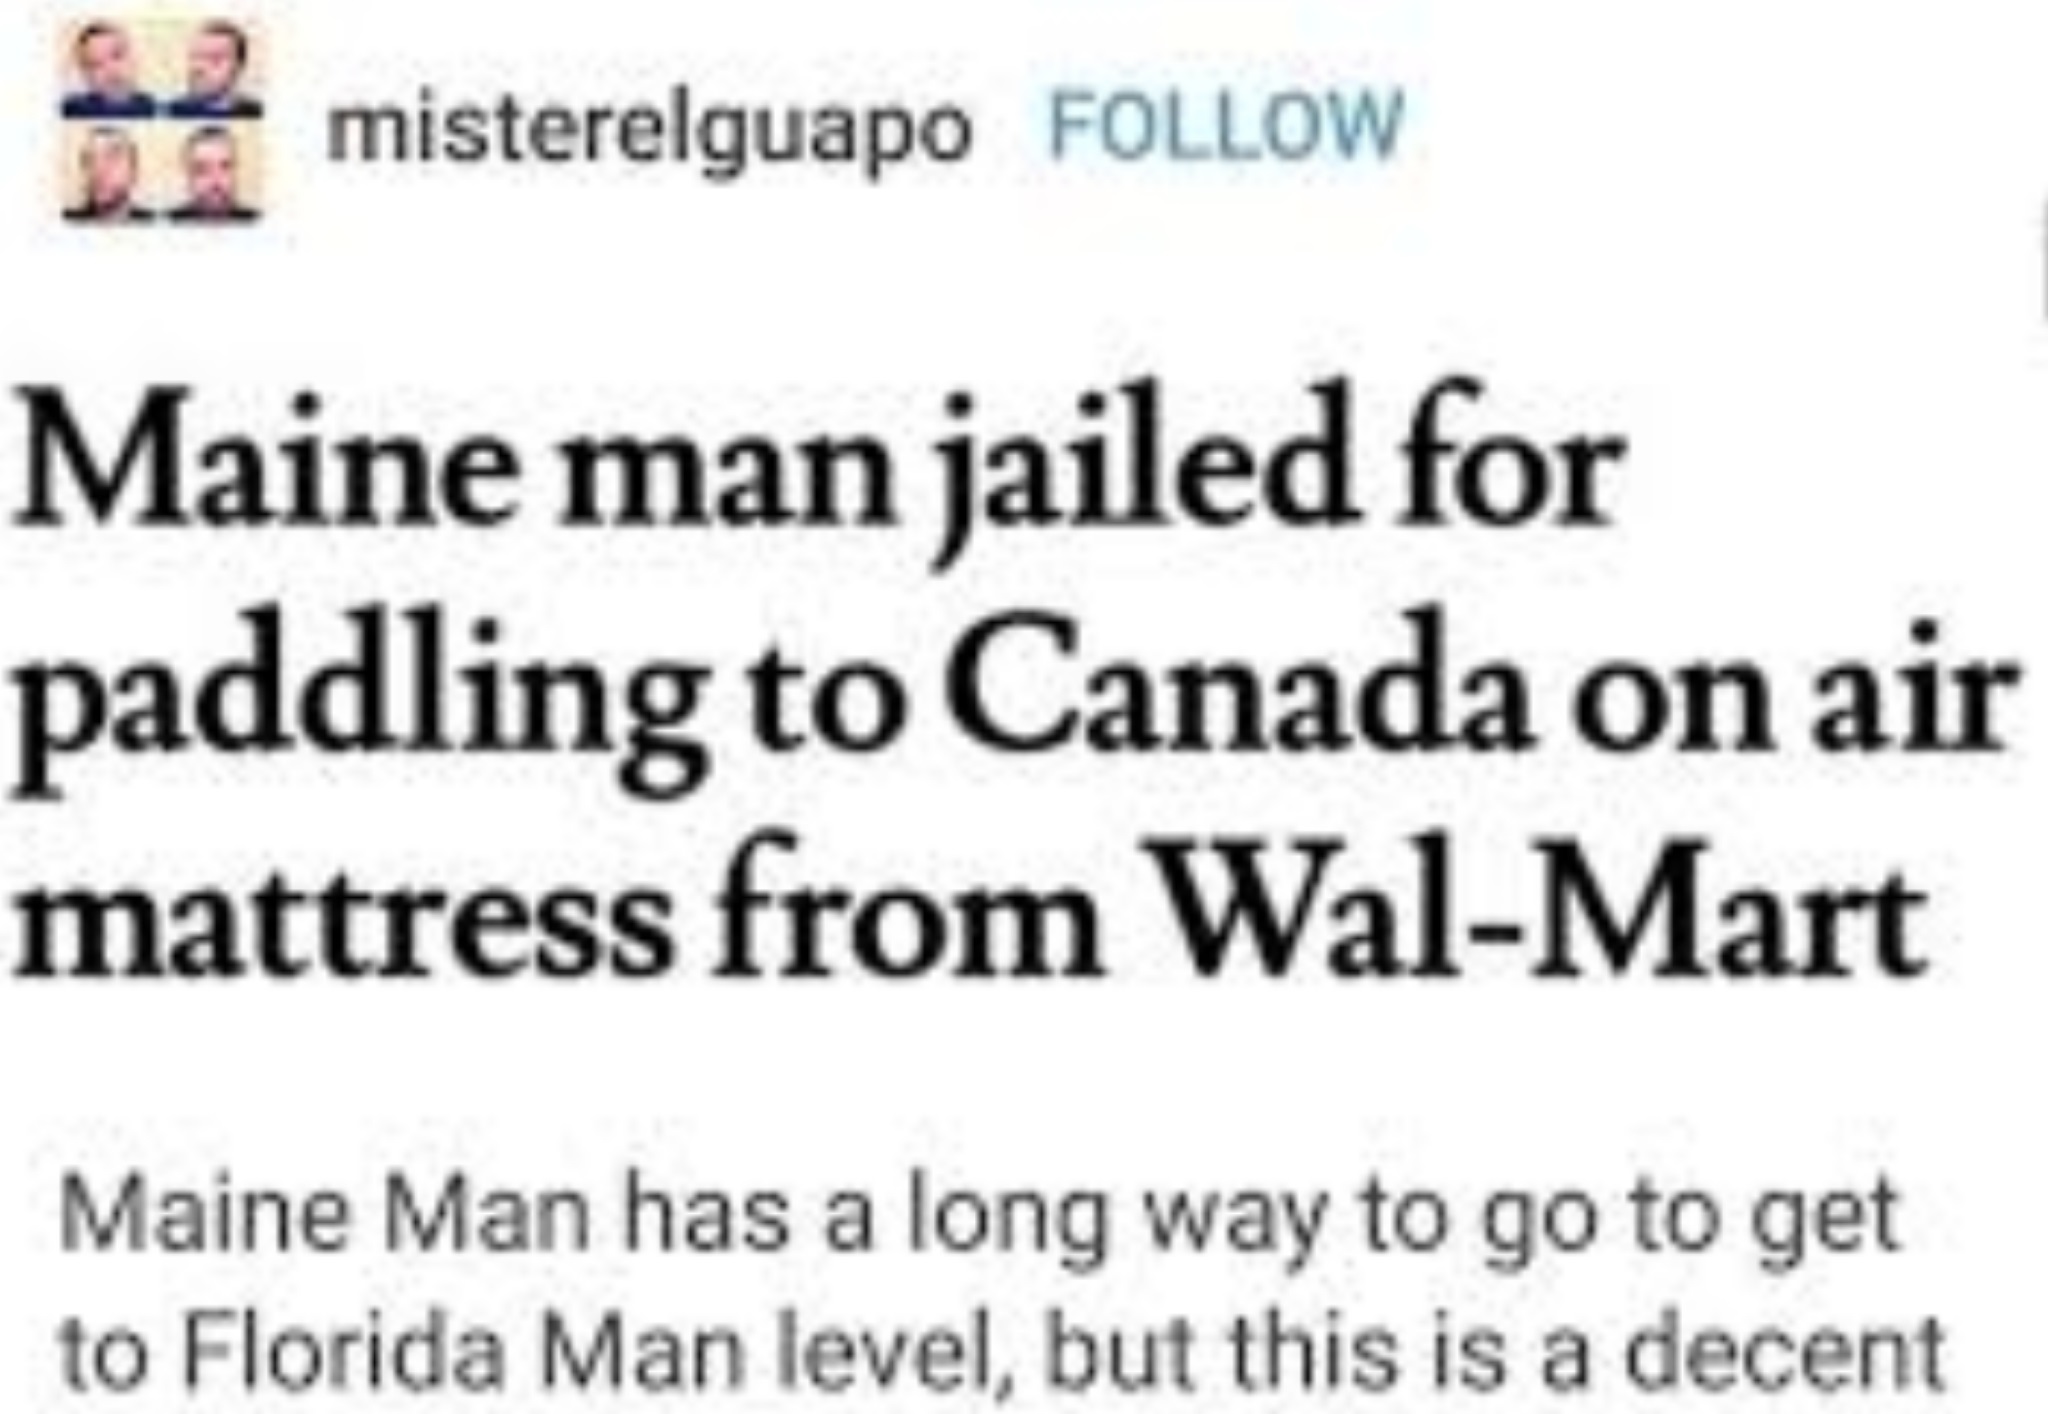 document - misterelguapo Maine man jailed for paddling to Canada on air mattress from WalMart Maine Man has a long way to go to get to Florida Man level, but this is a decent